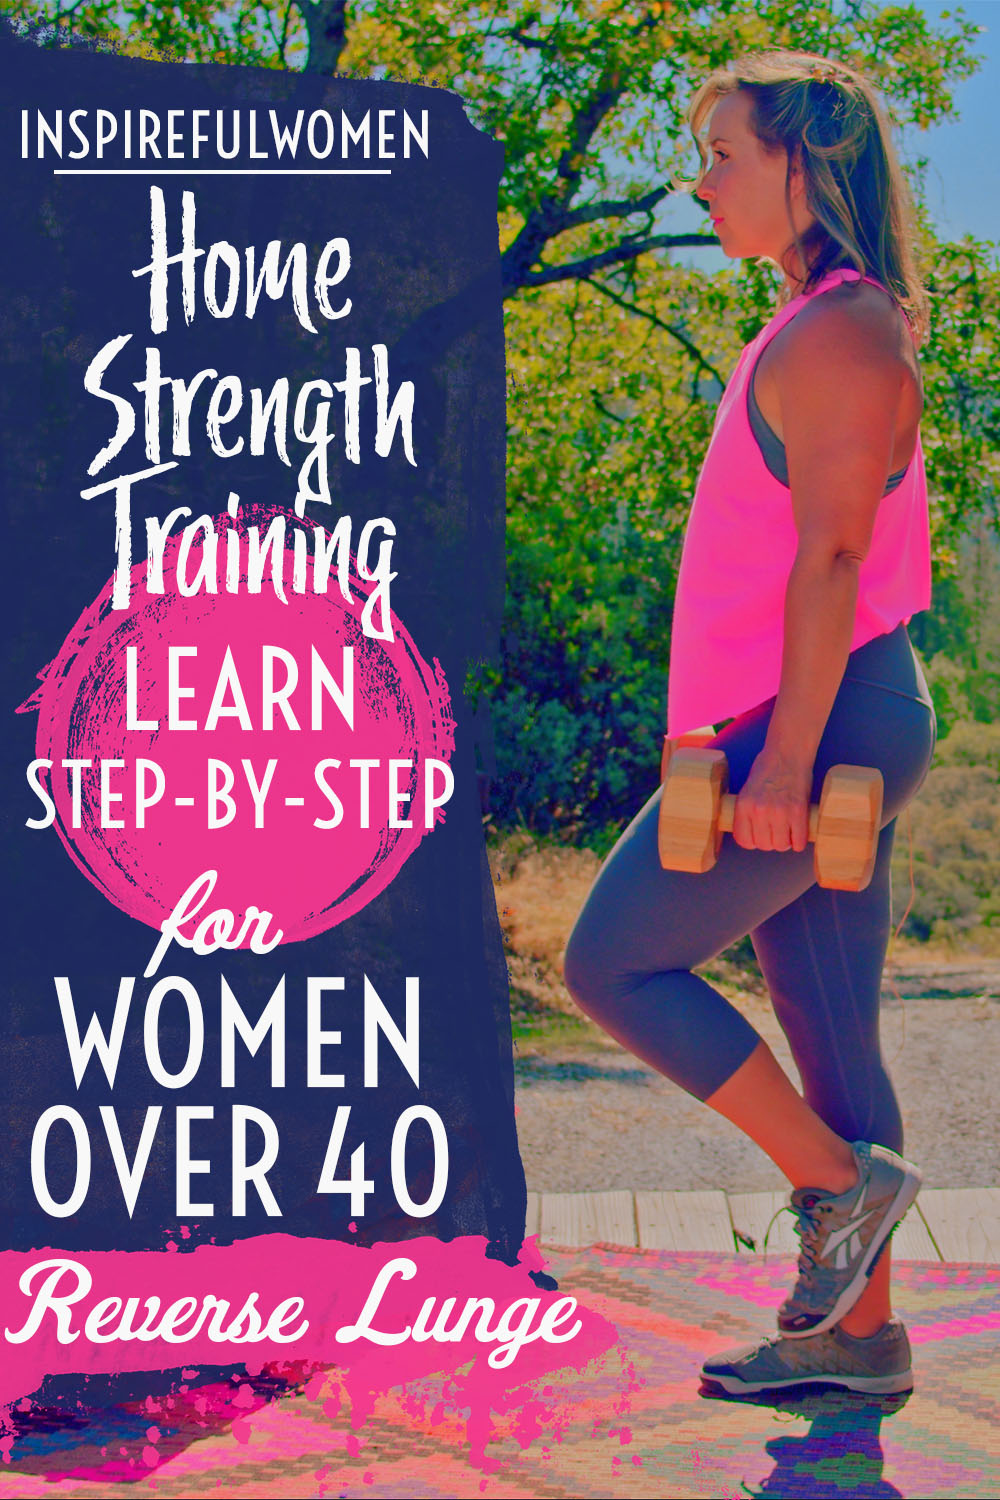 reverse-lunge-squat-alternative-for-bad-knees-glutes-quadriceps-exercise-at-home-women-40+